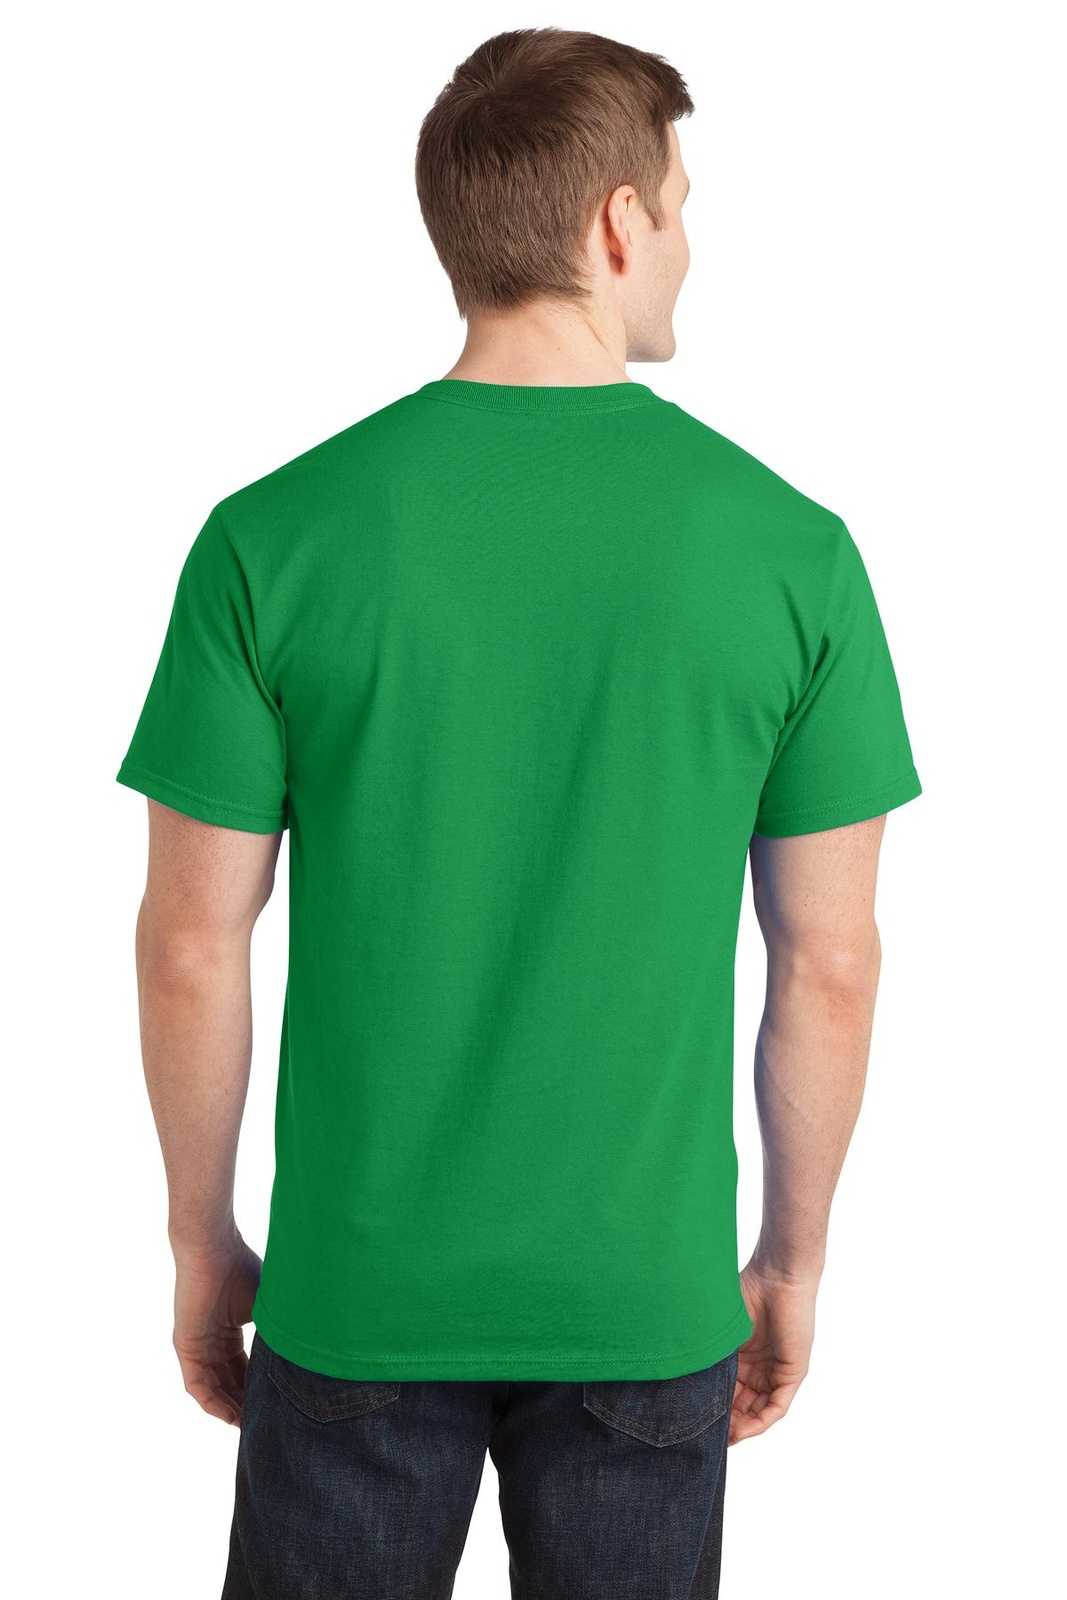 Port &amp; Company PC150 Ring Spun Cotton Tee - Clover Green - HIT a Double - 2